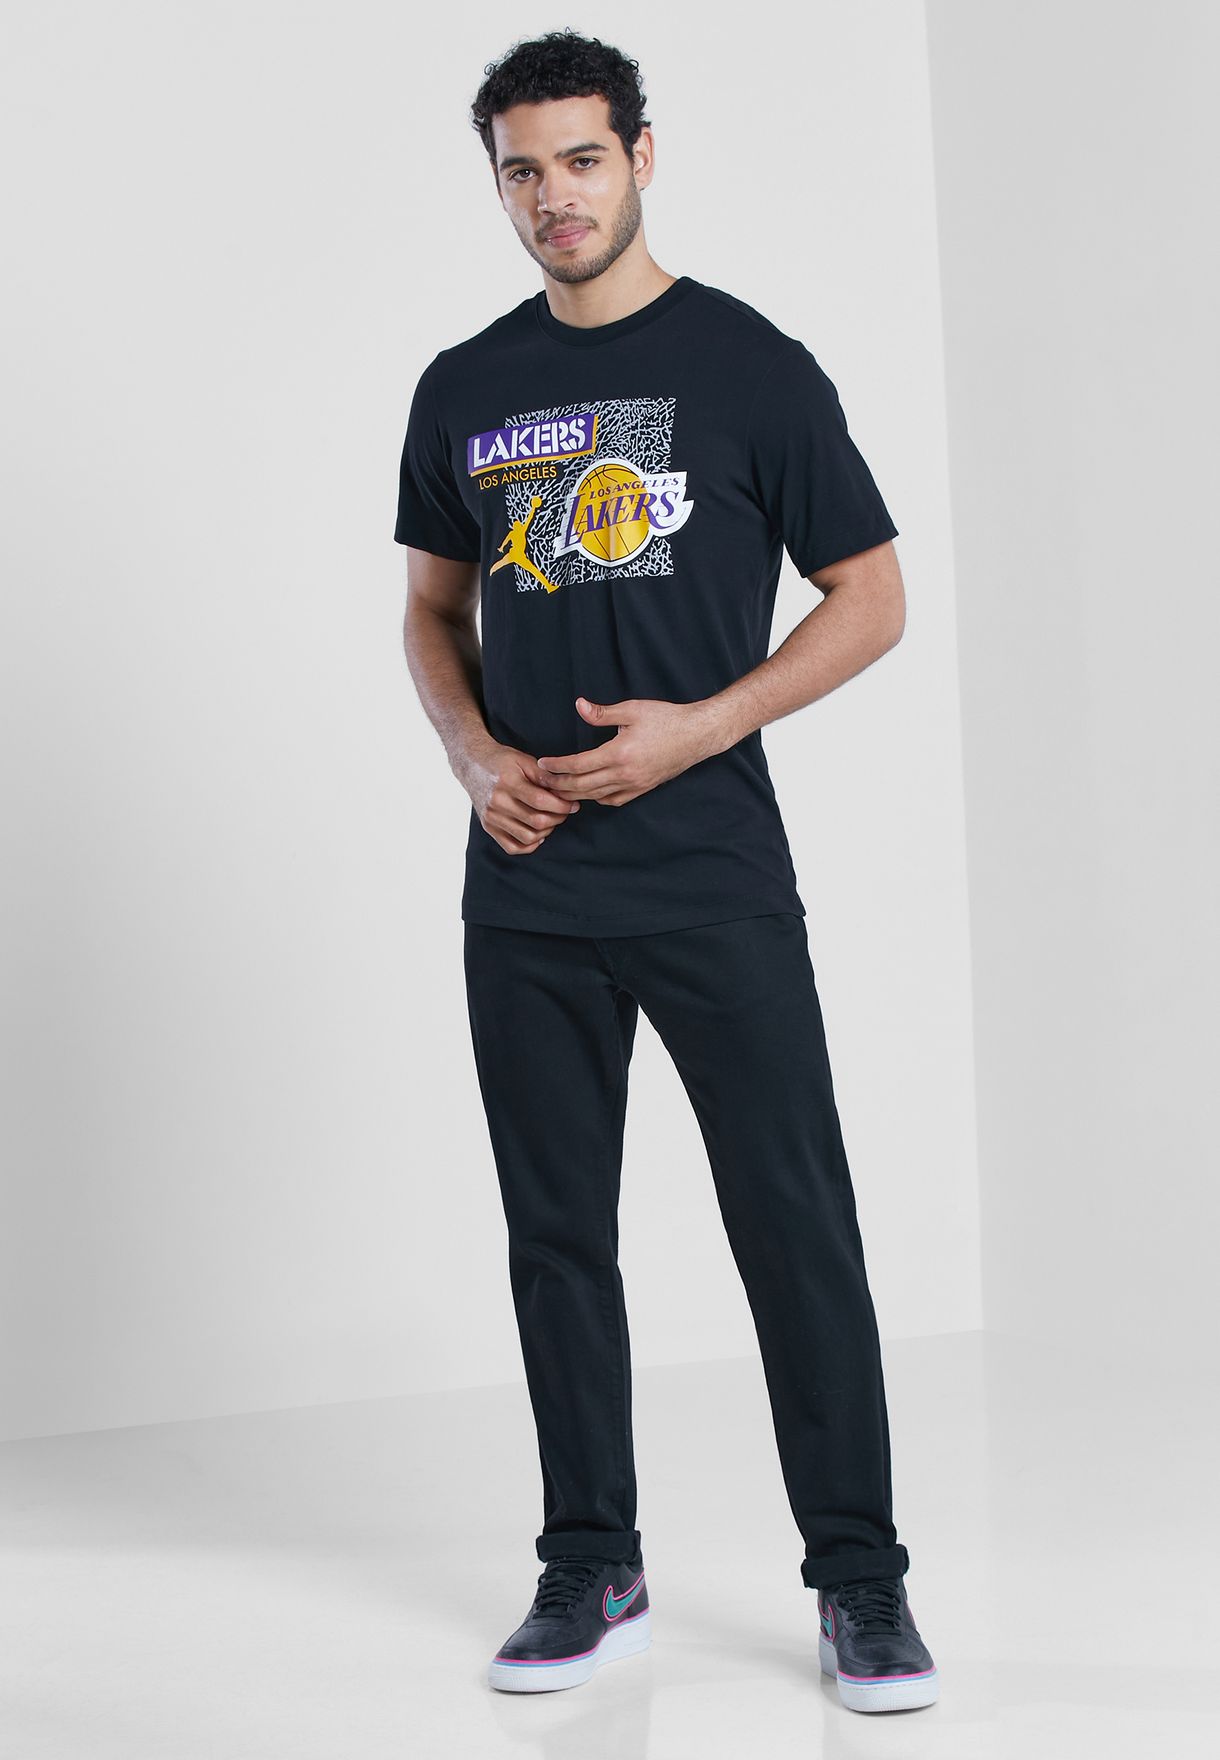 Los Angeles Lakers Statement T-Shirt